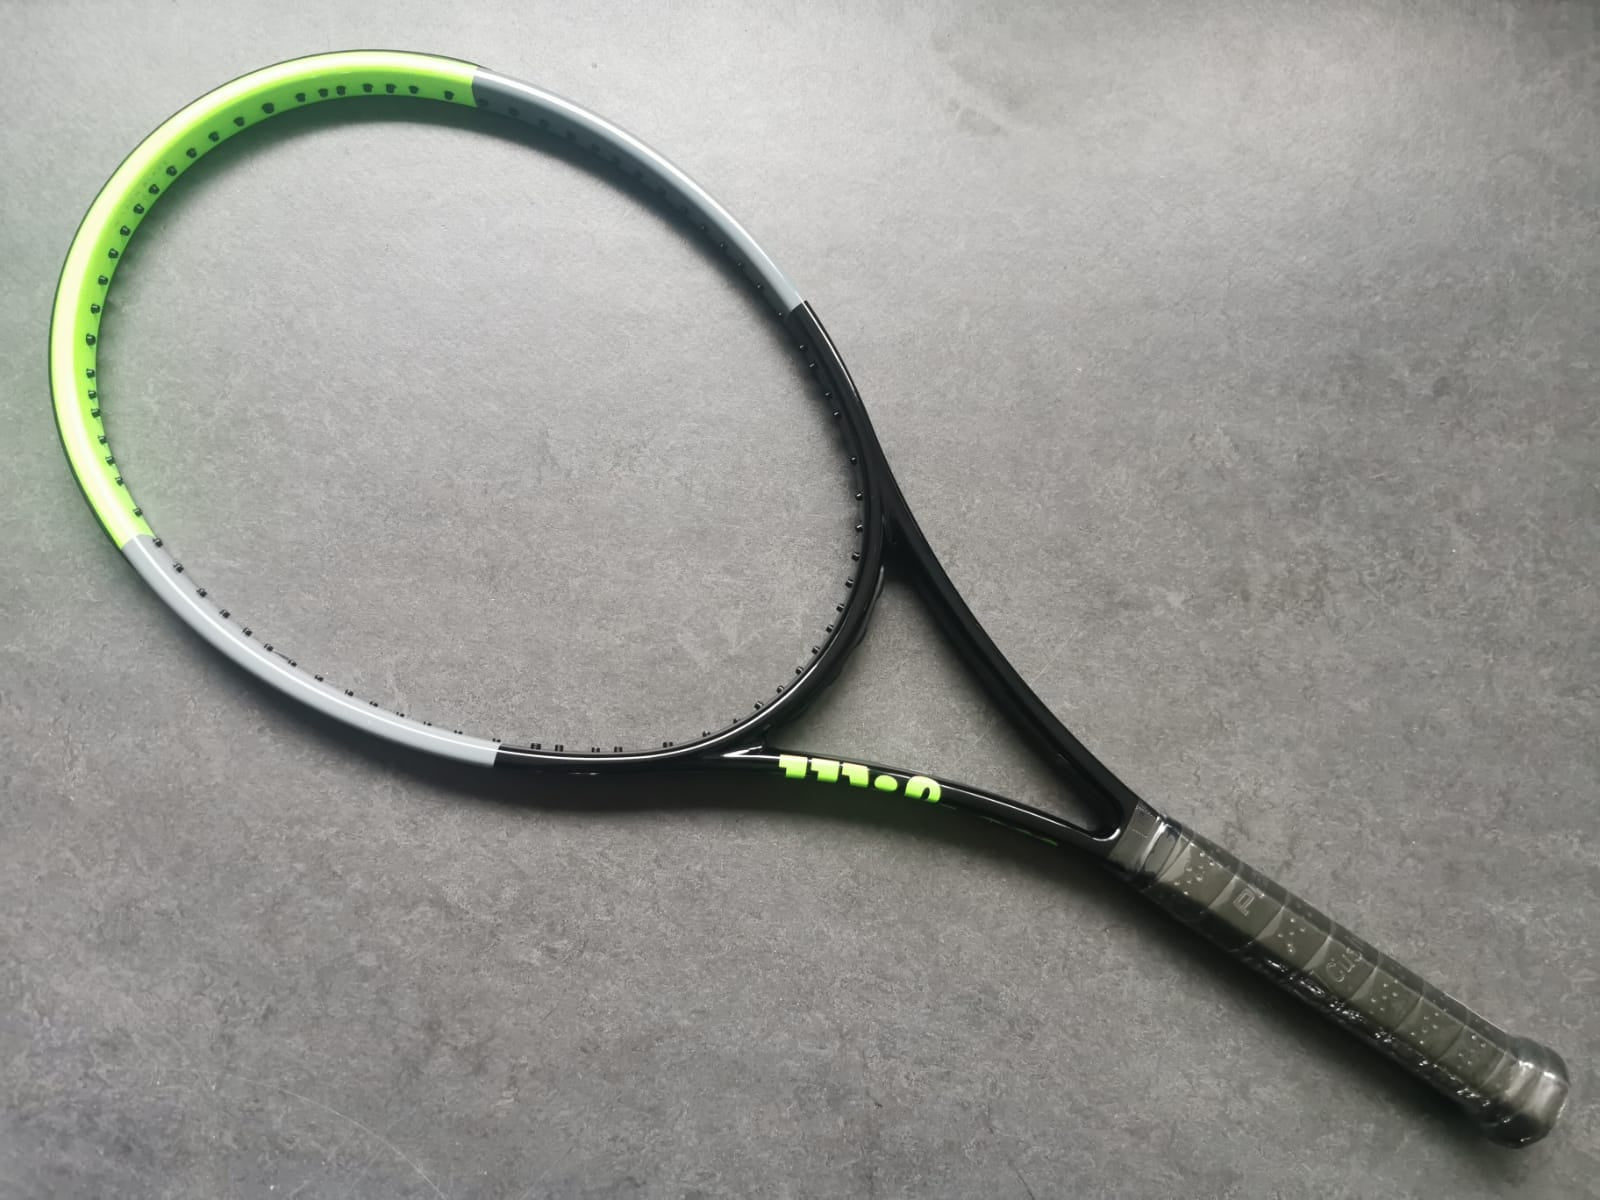 Wilson H22 Blade 98 Countervail (18x20)